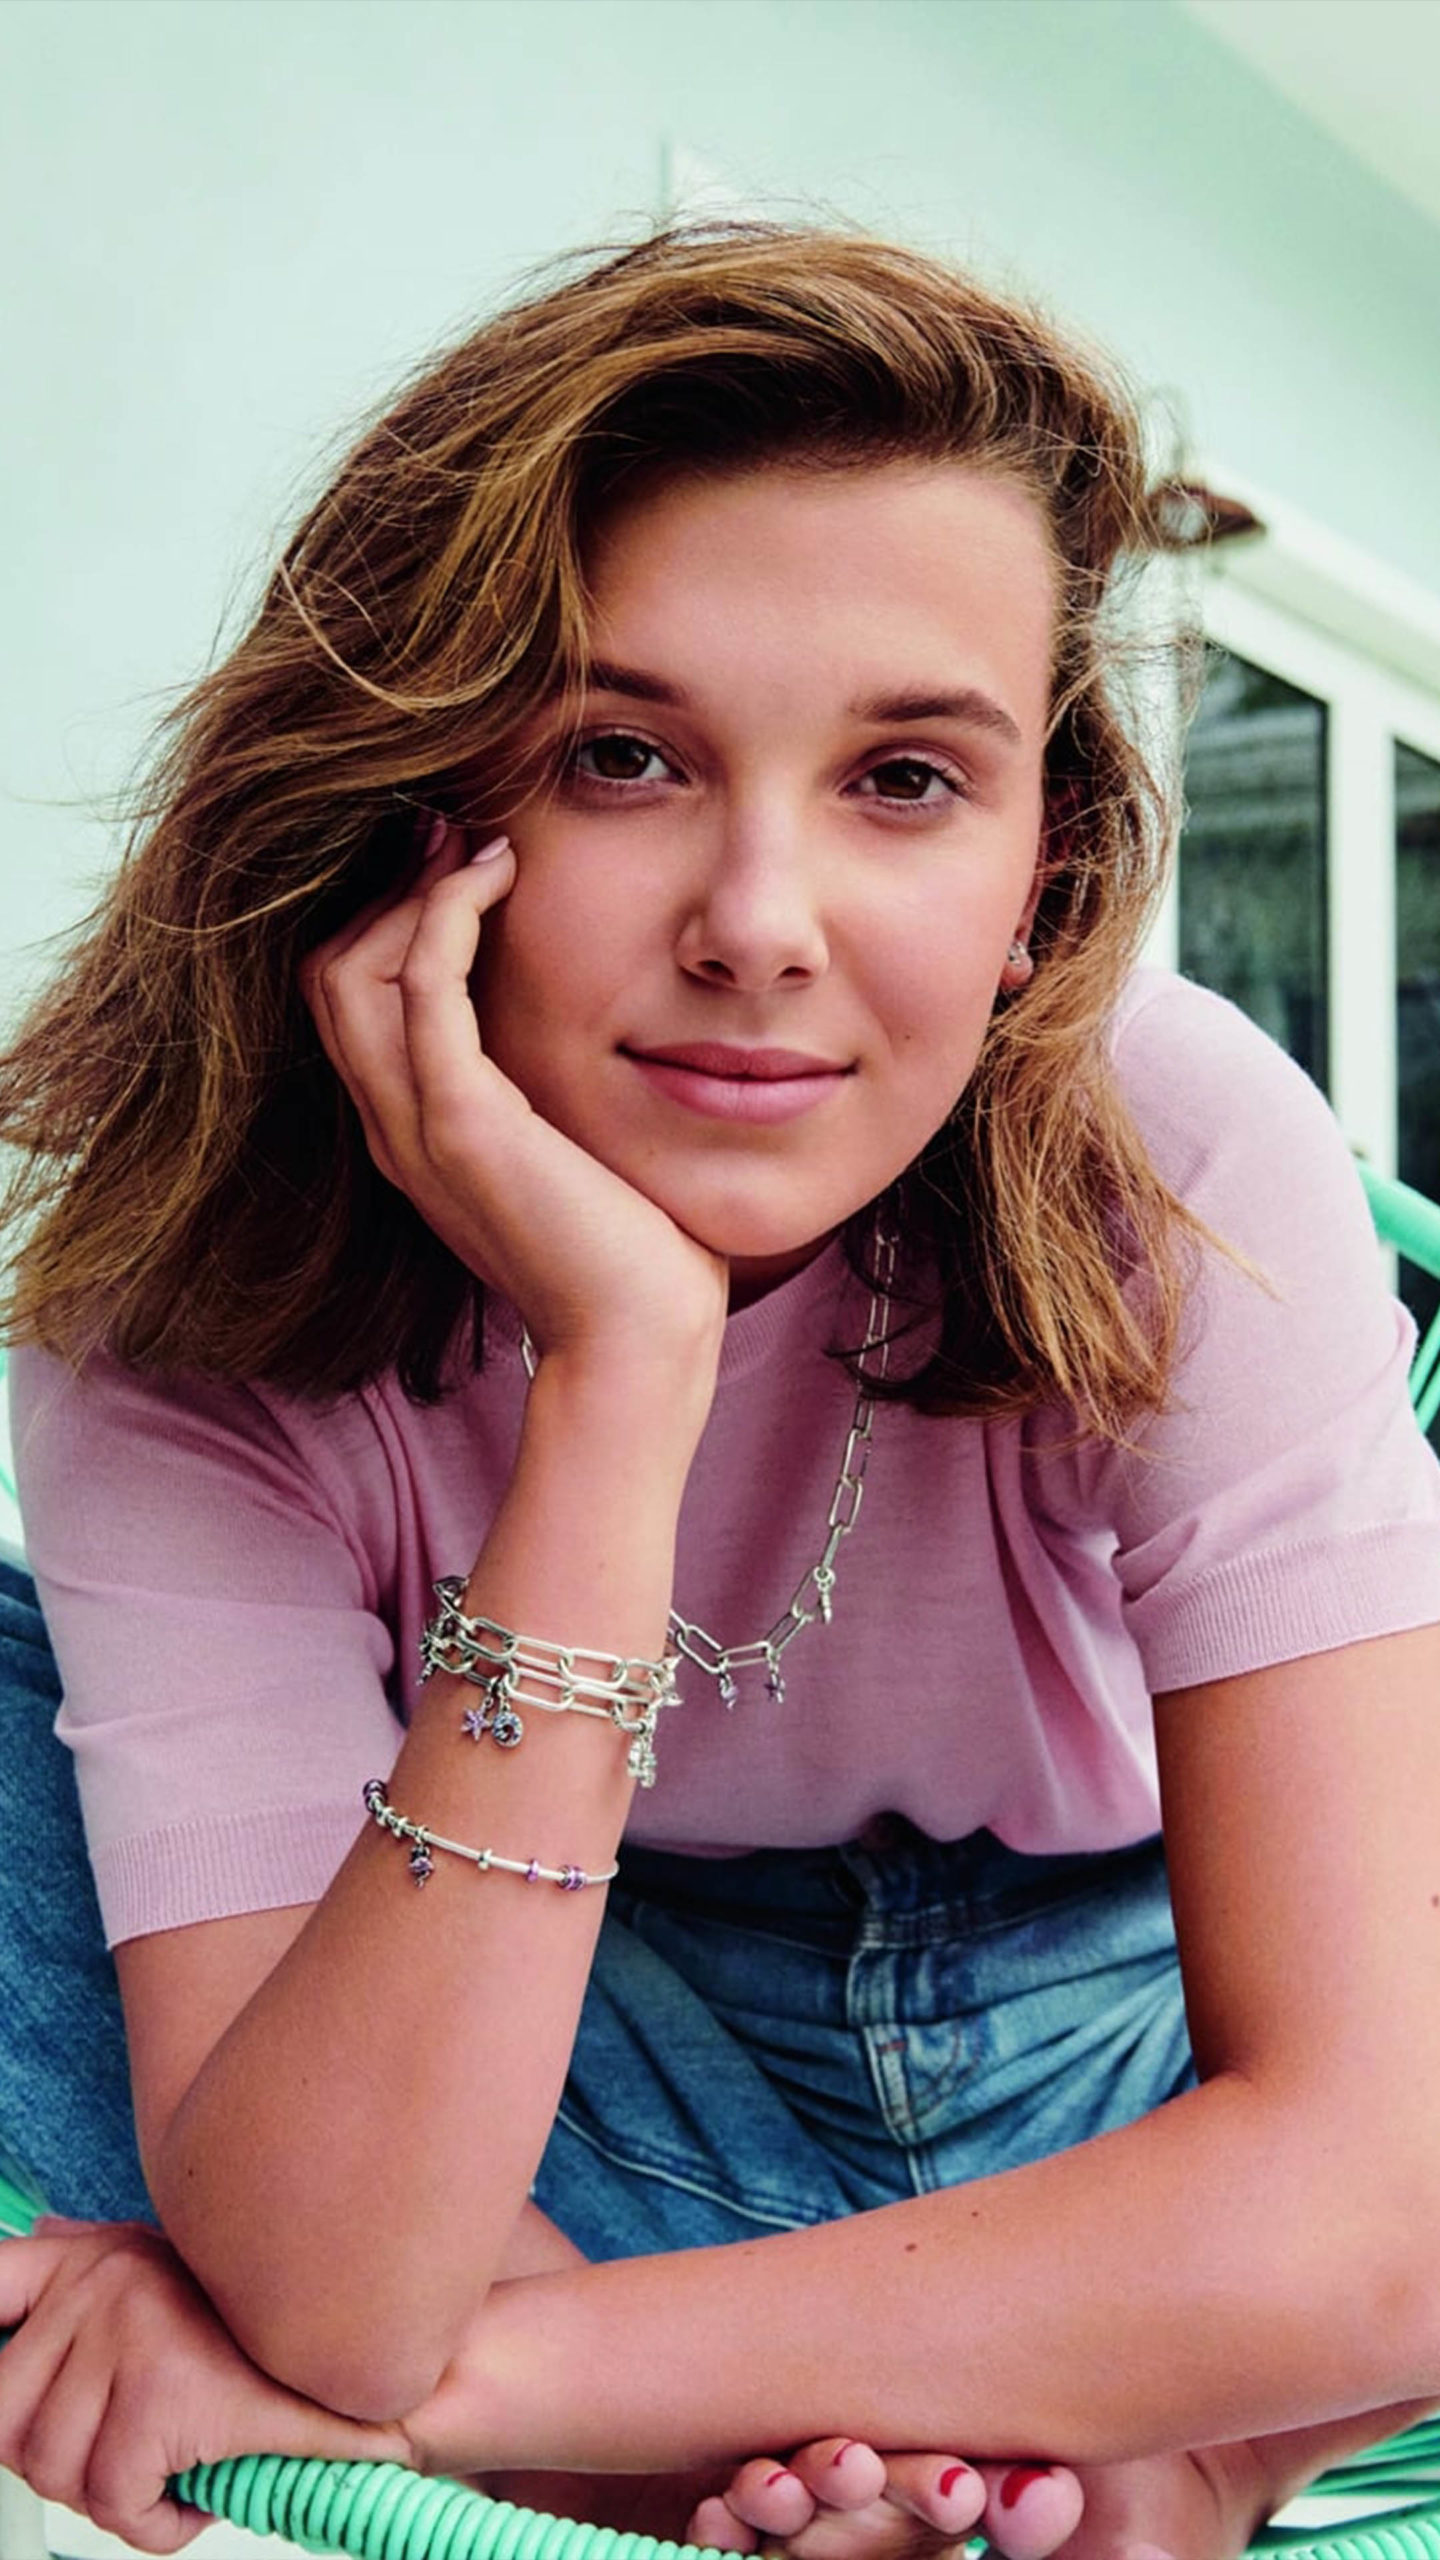 Millie Bobby Brown Photo Shoot 2020